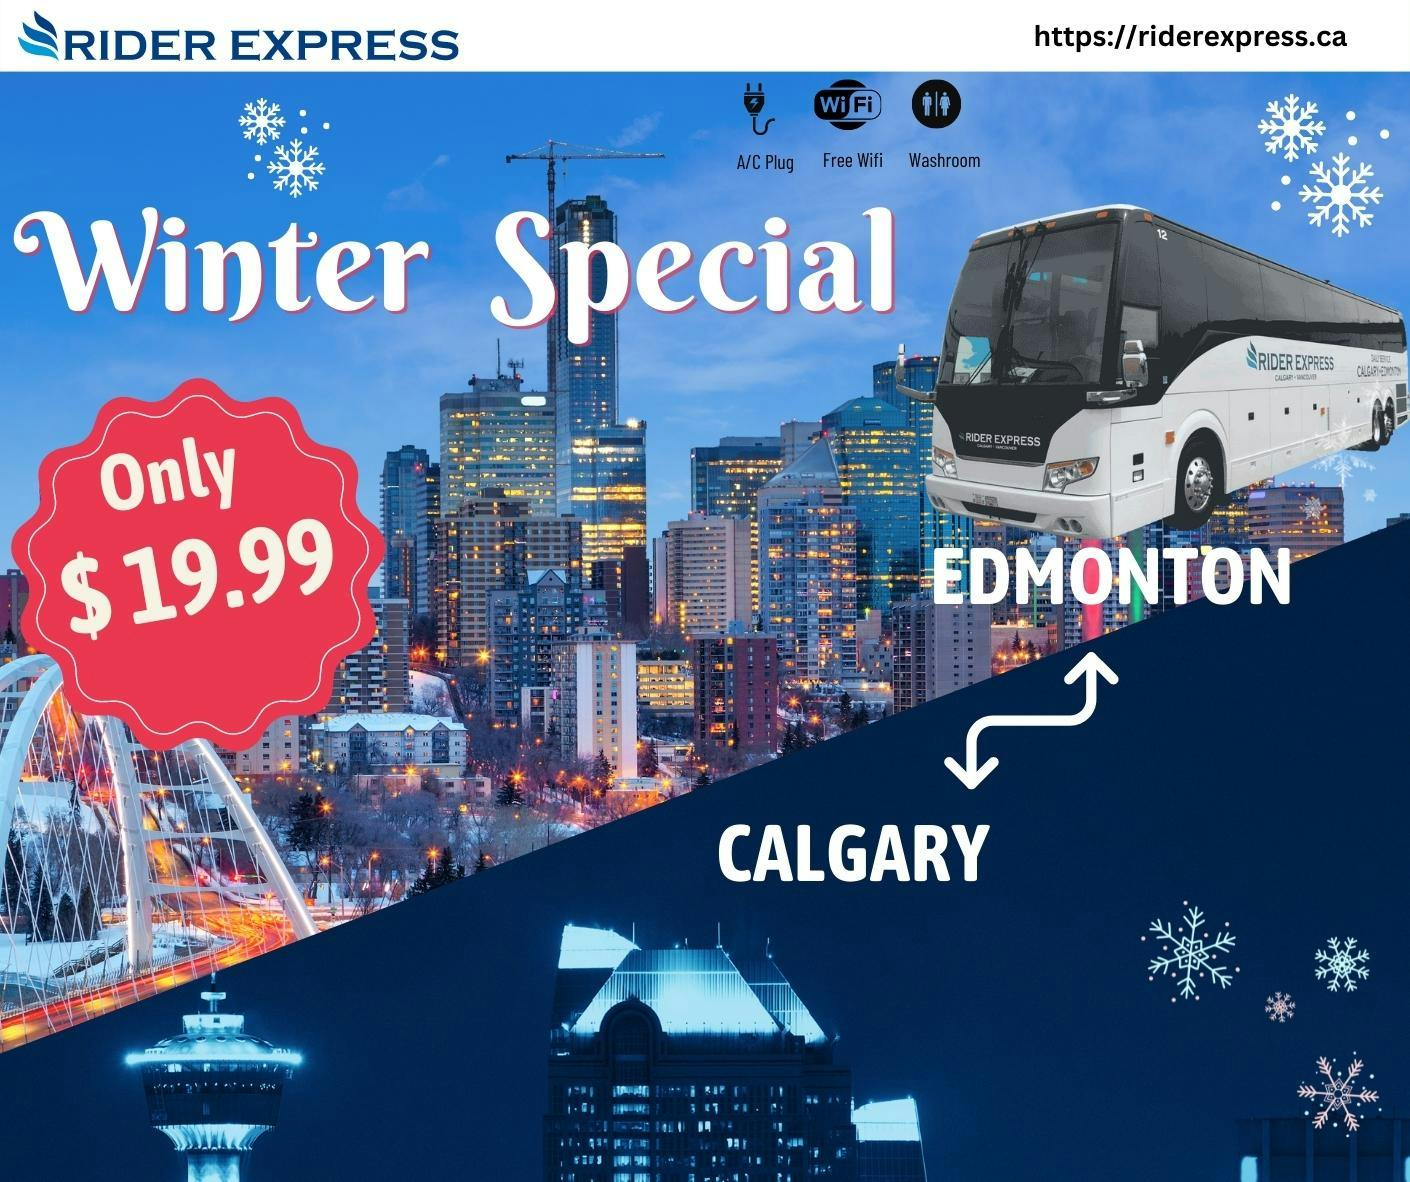 Winter Special For Edmonton ⇔ Calgary Buses For Only $19.99 with Rider Express